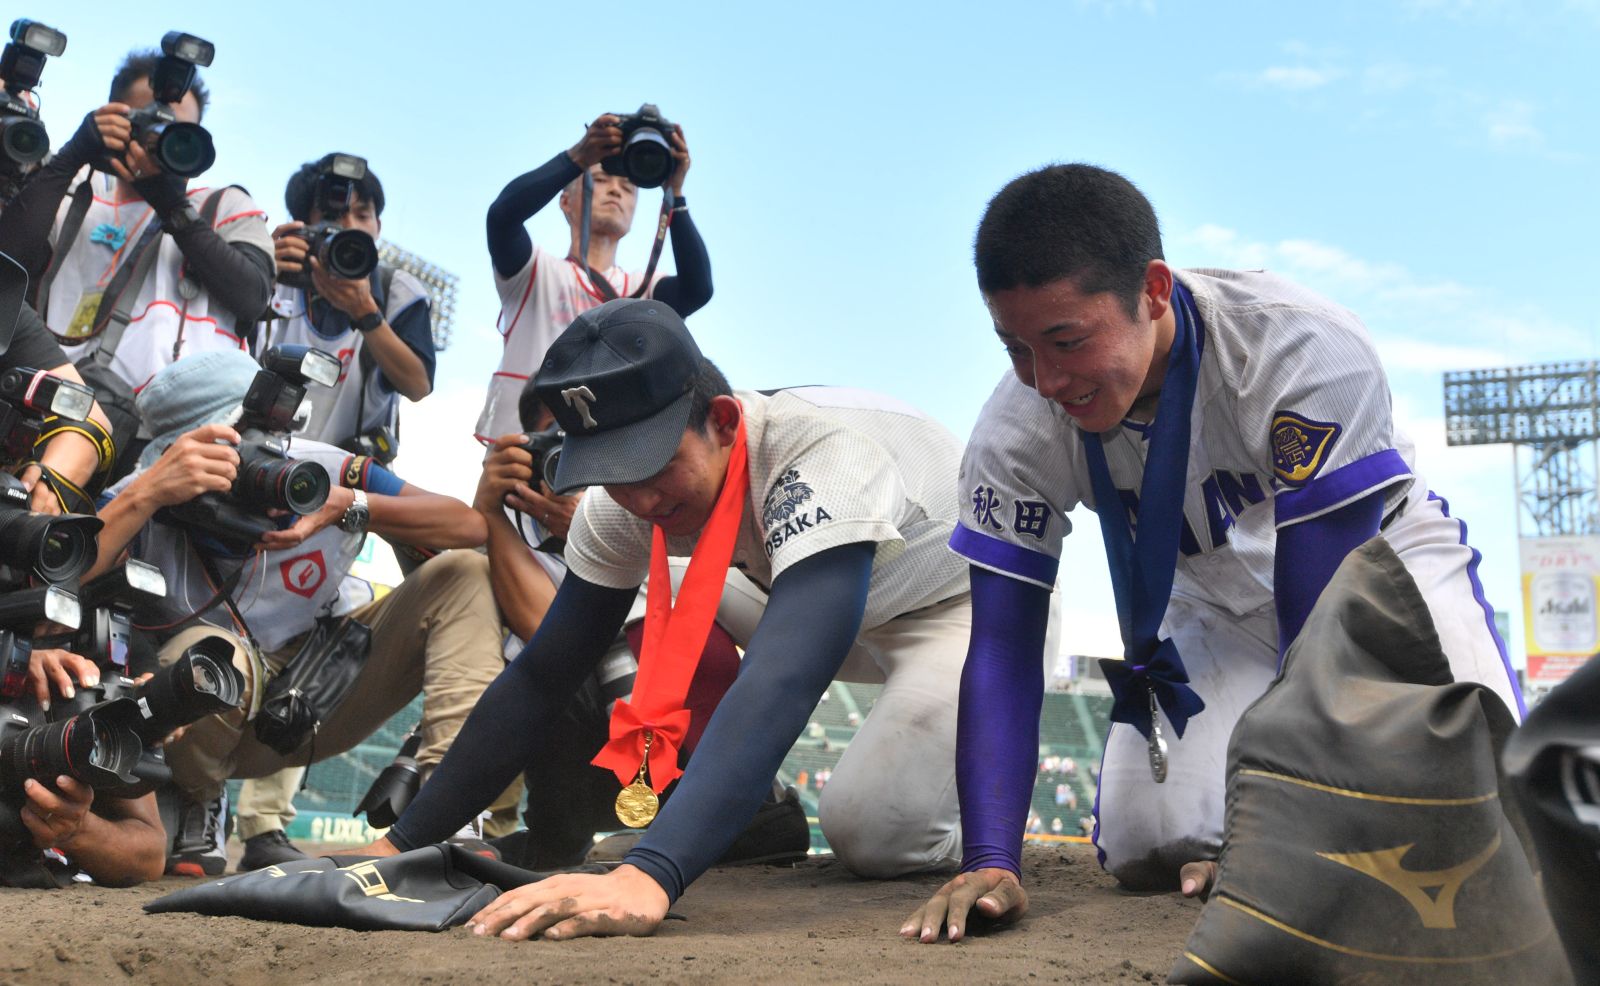 Koshien Players as ‘Japanese Gods’: Why We’re Crazy About High School Baseball